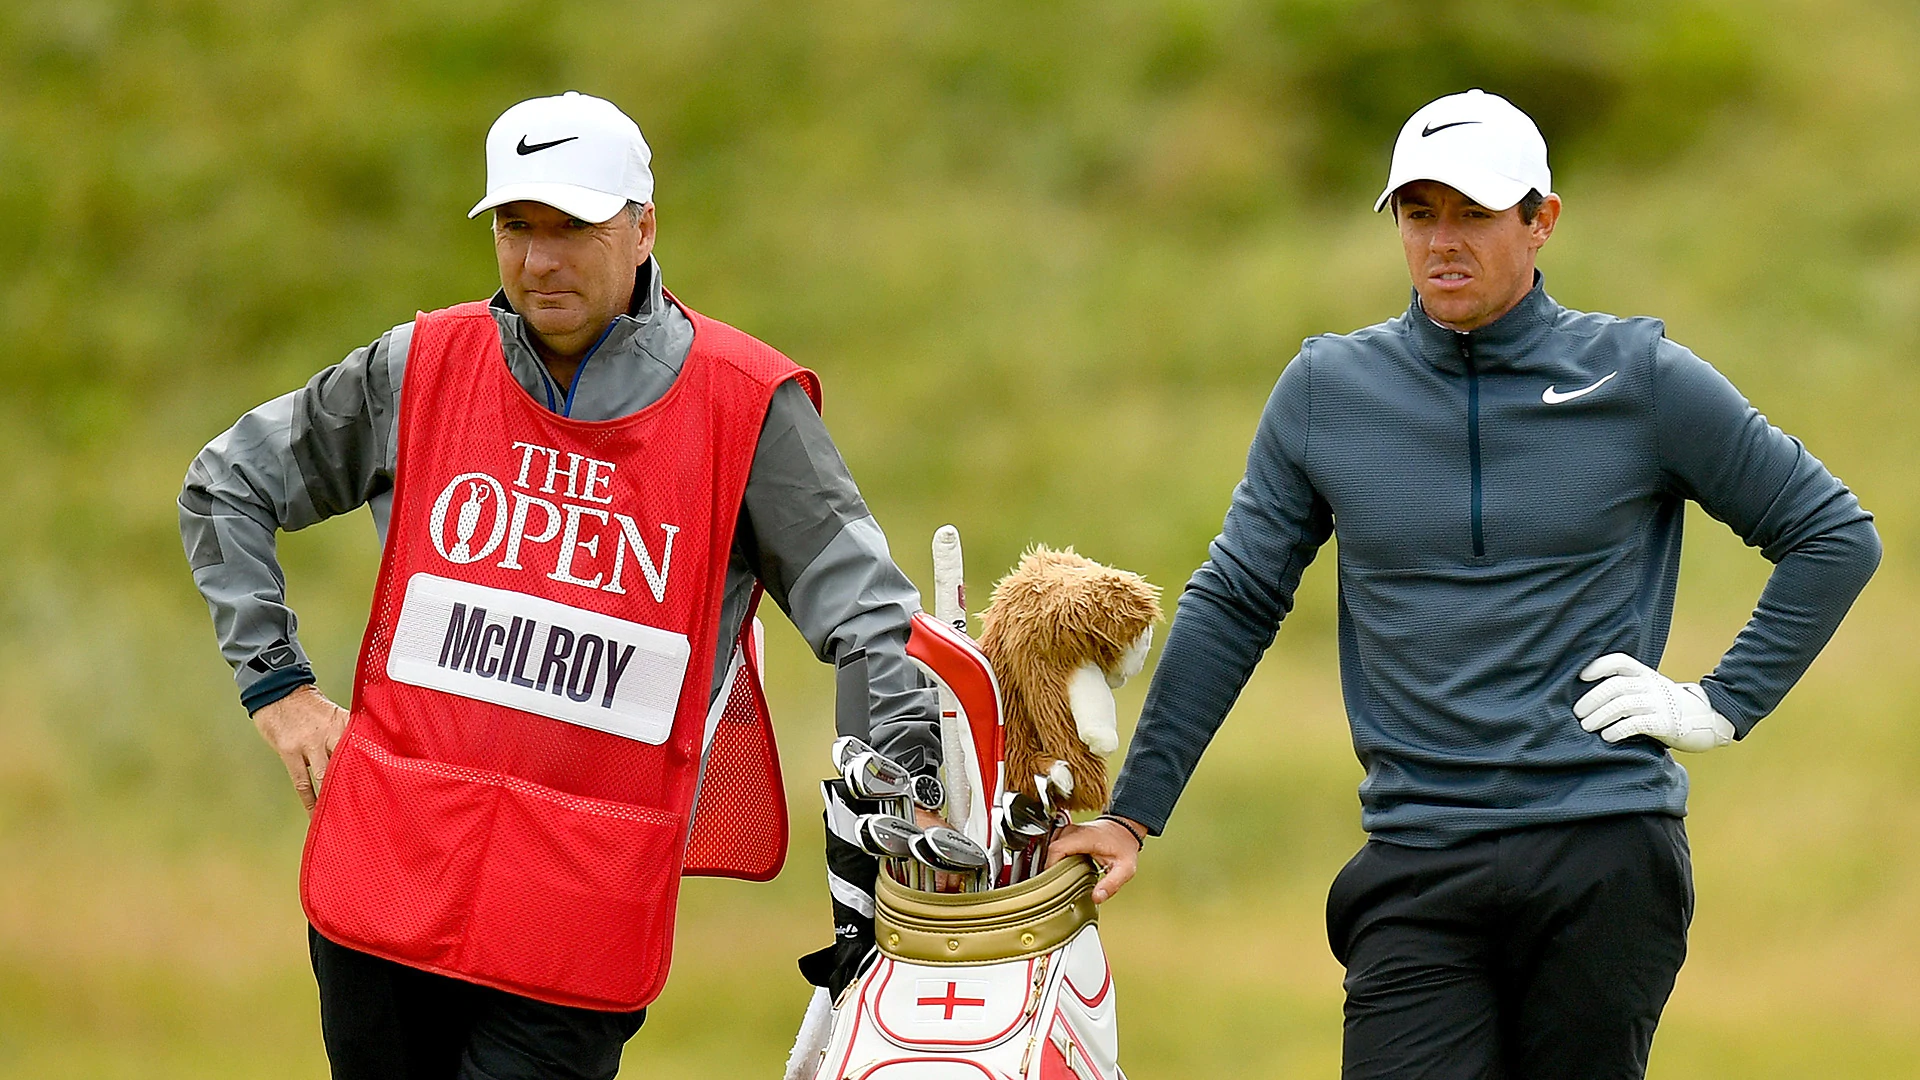 Report: McIlroy splits with longtime caddie Fitzgerald 4